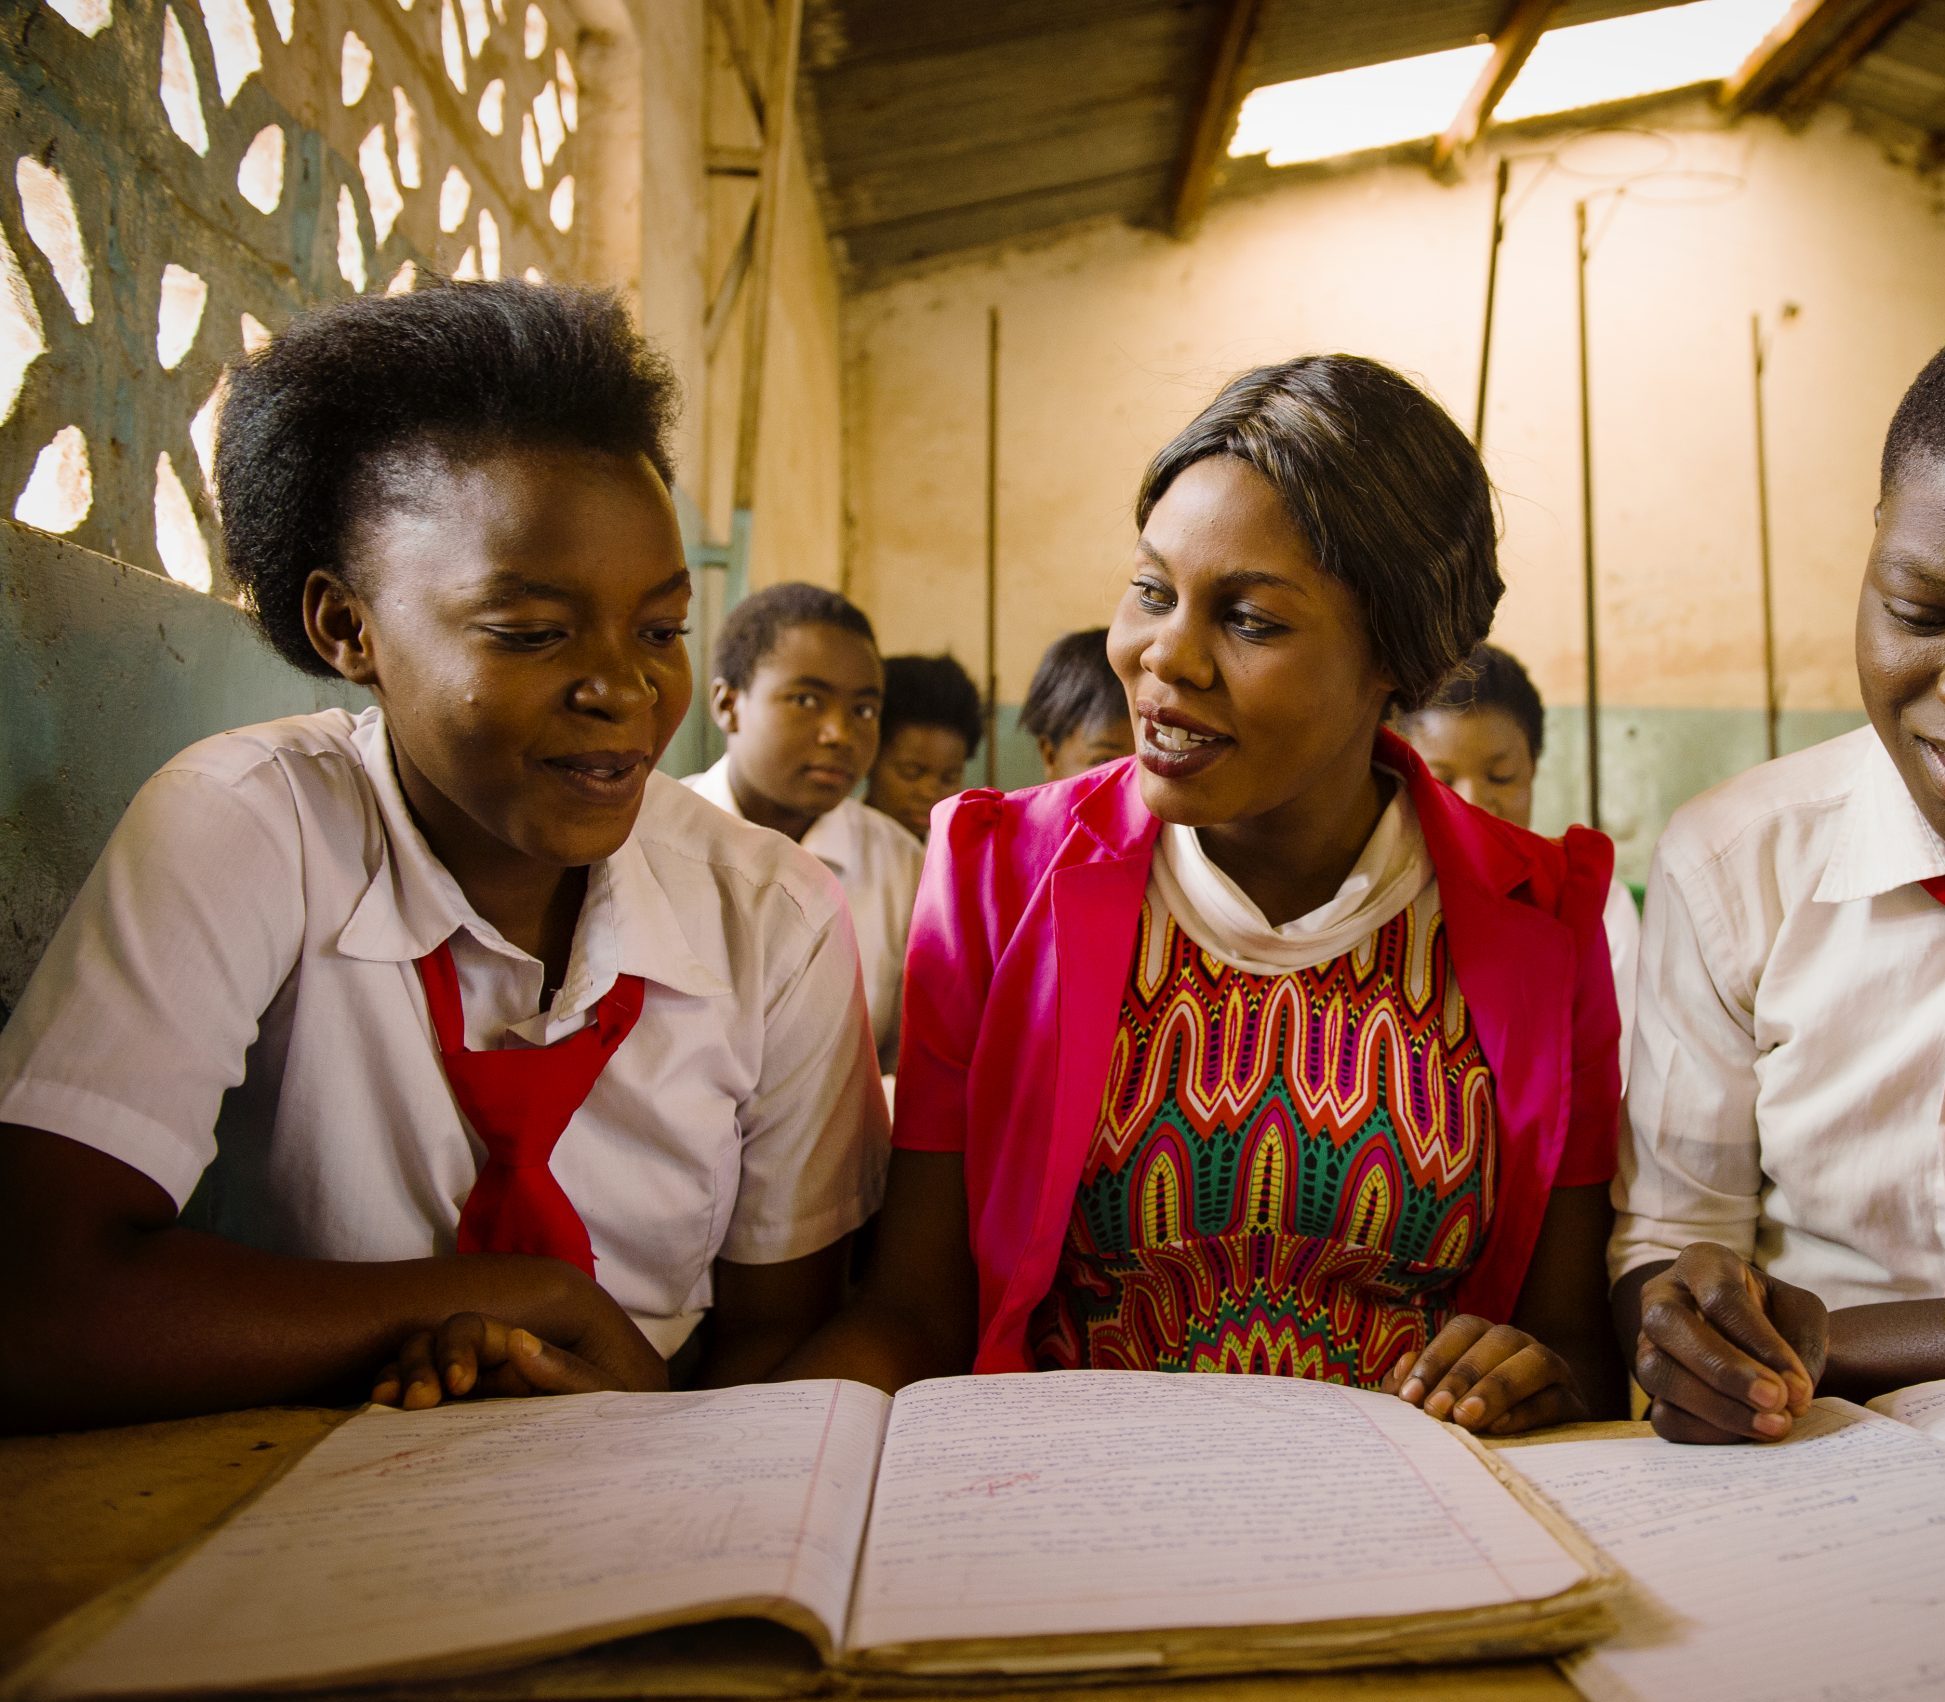 Navitas Education Trust partners with CAMFED in Zambia